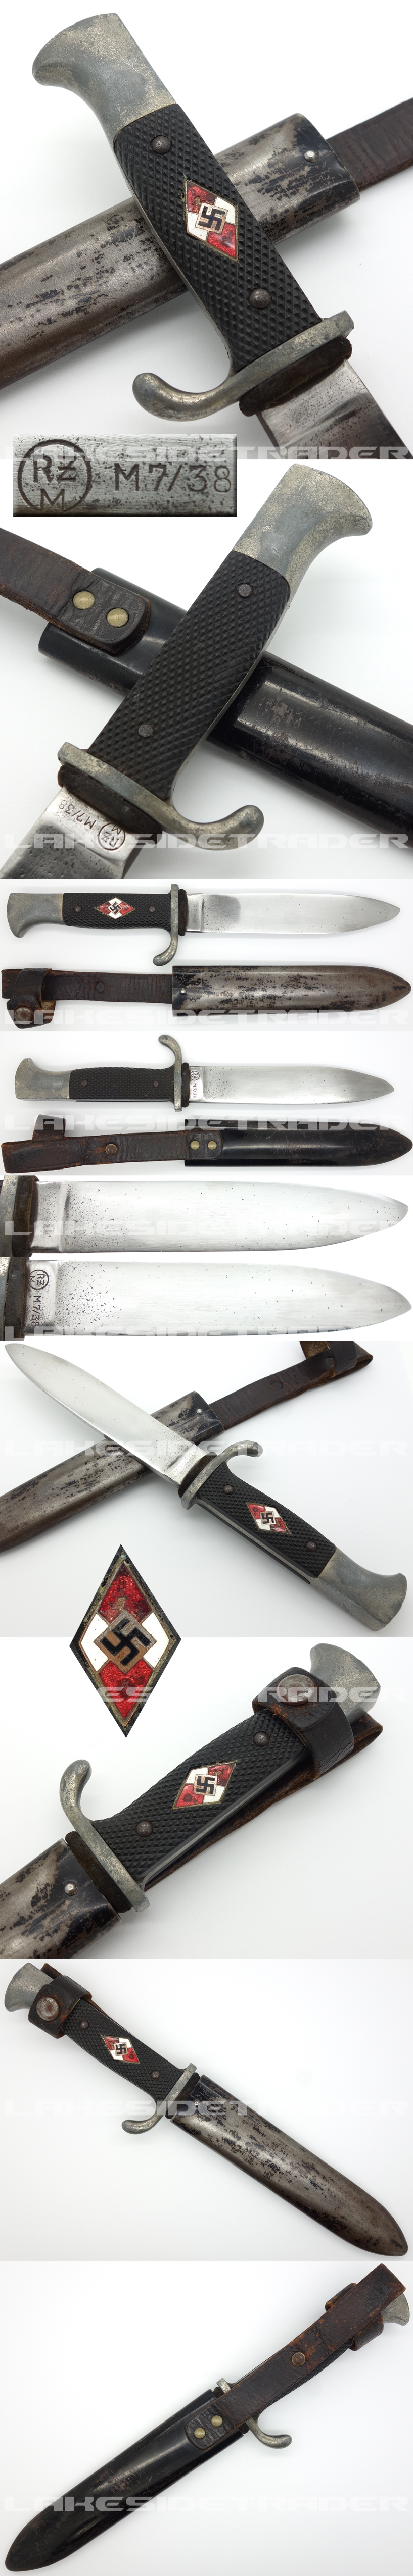 Hitler Youth Knife by RZM M7/38